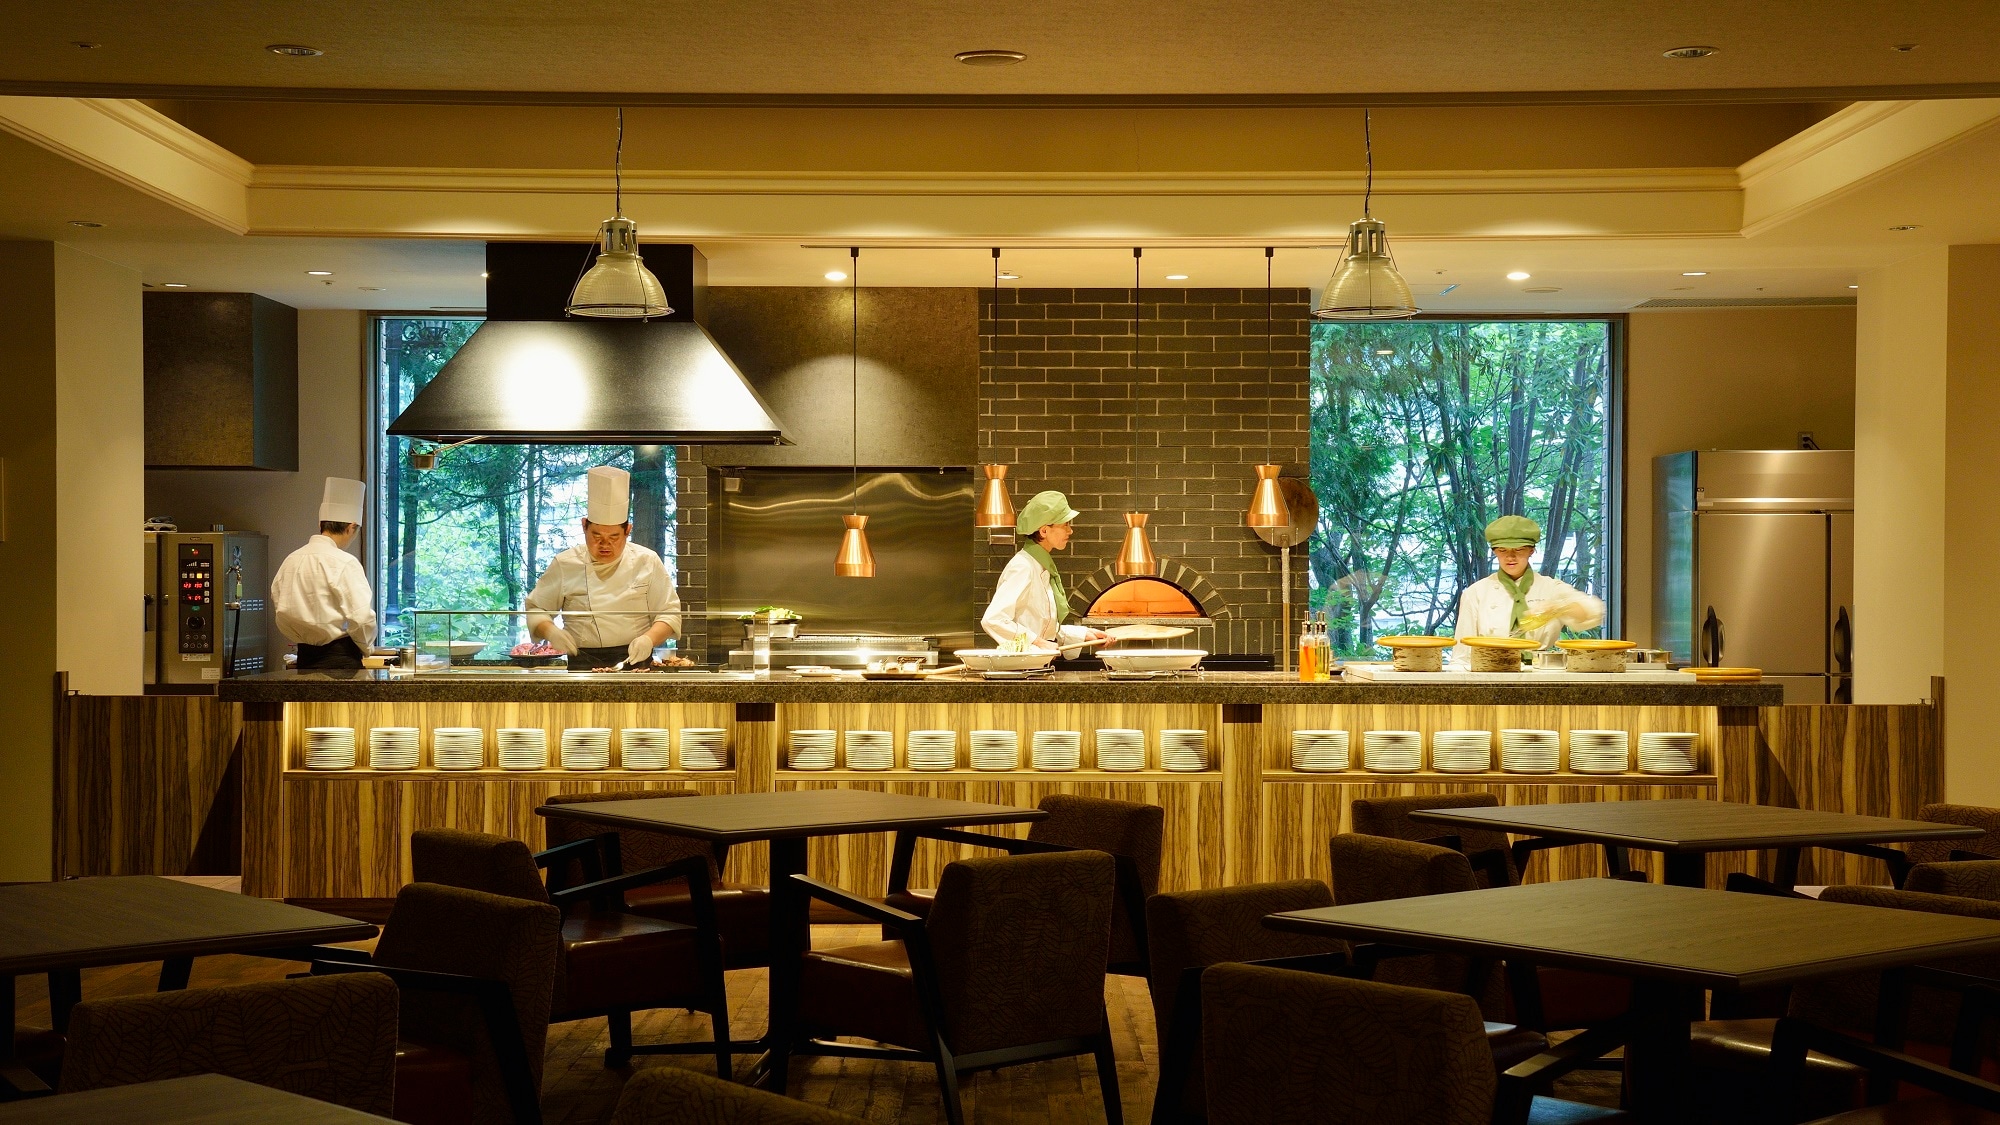 [Restaurant] Pizza and steak are cooked right in front of you in our proud live kitchen!